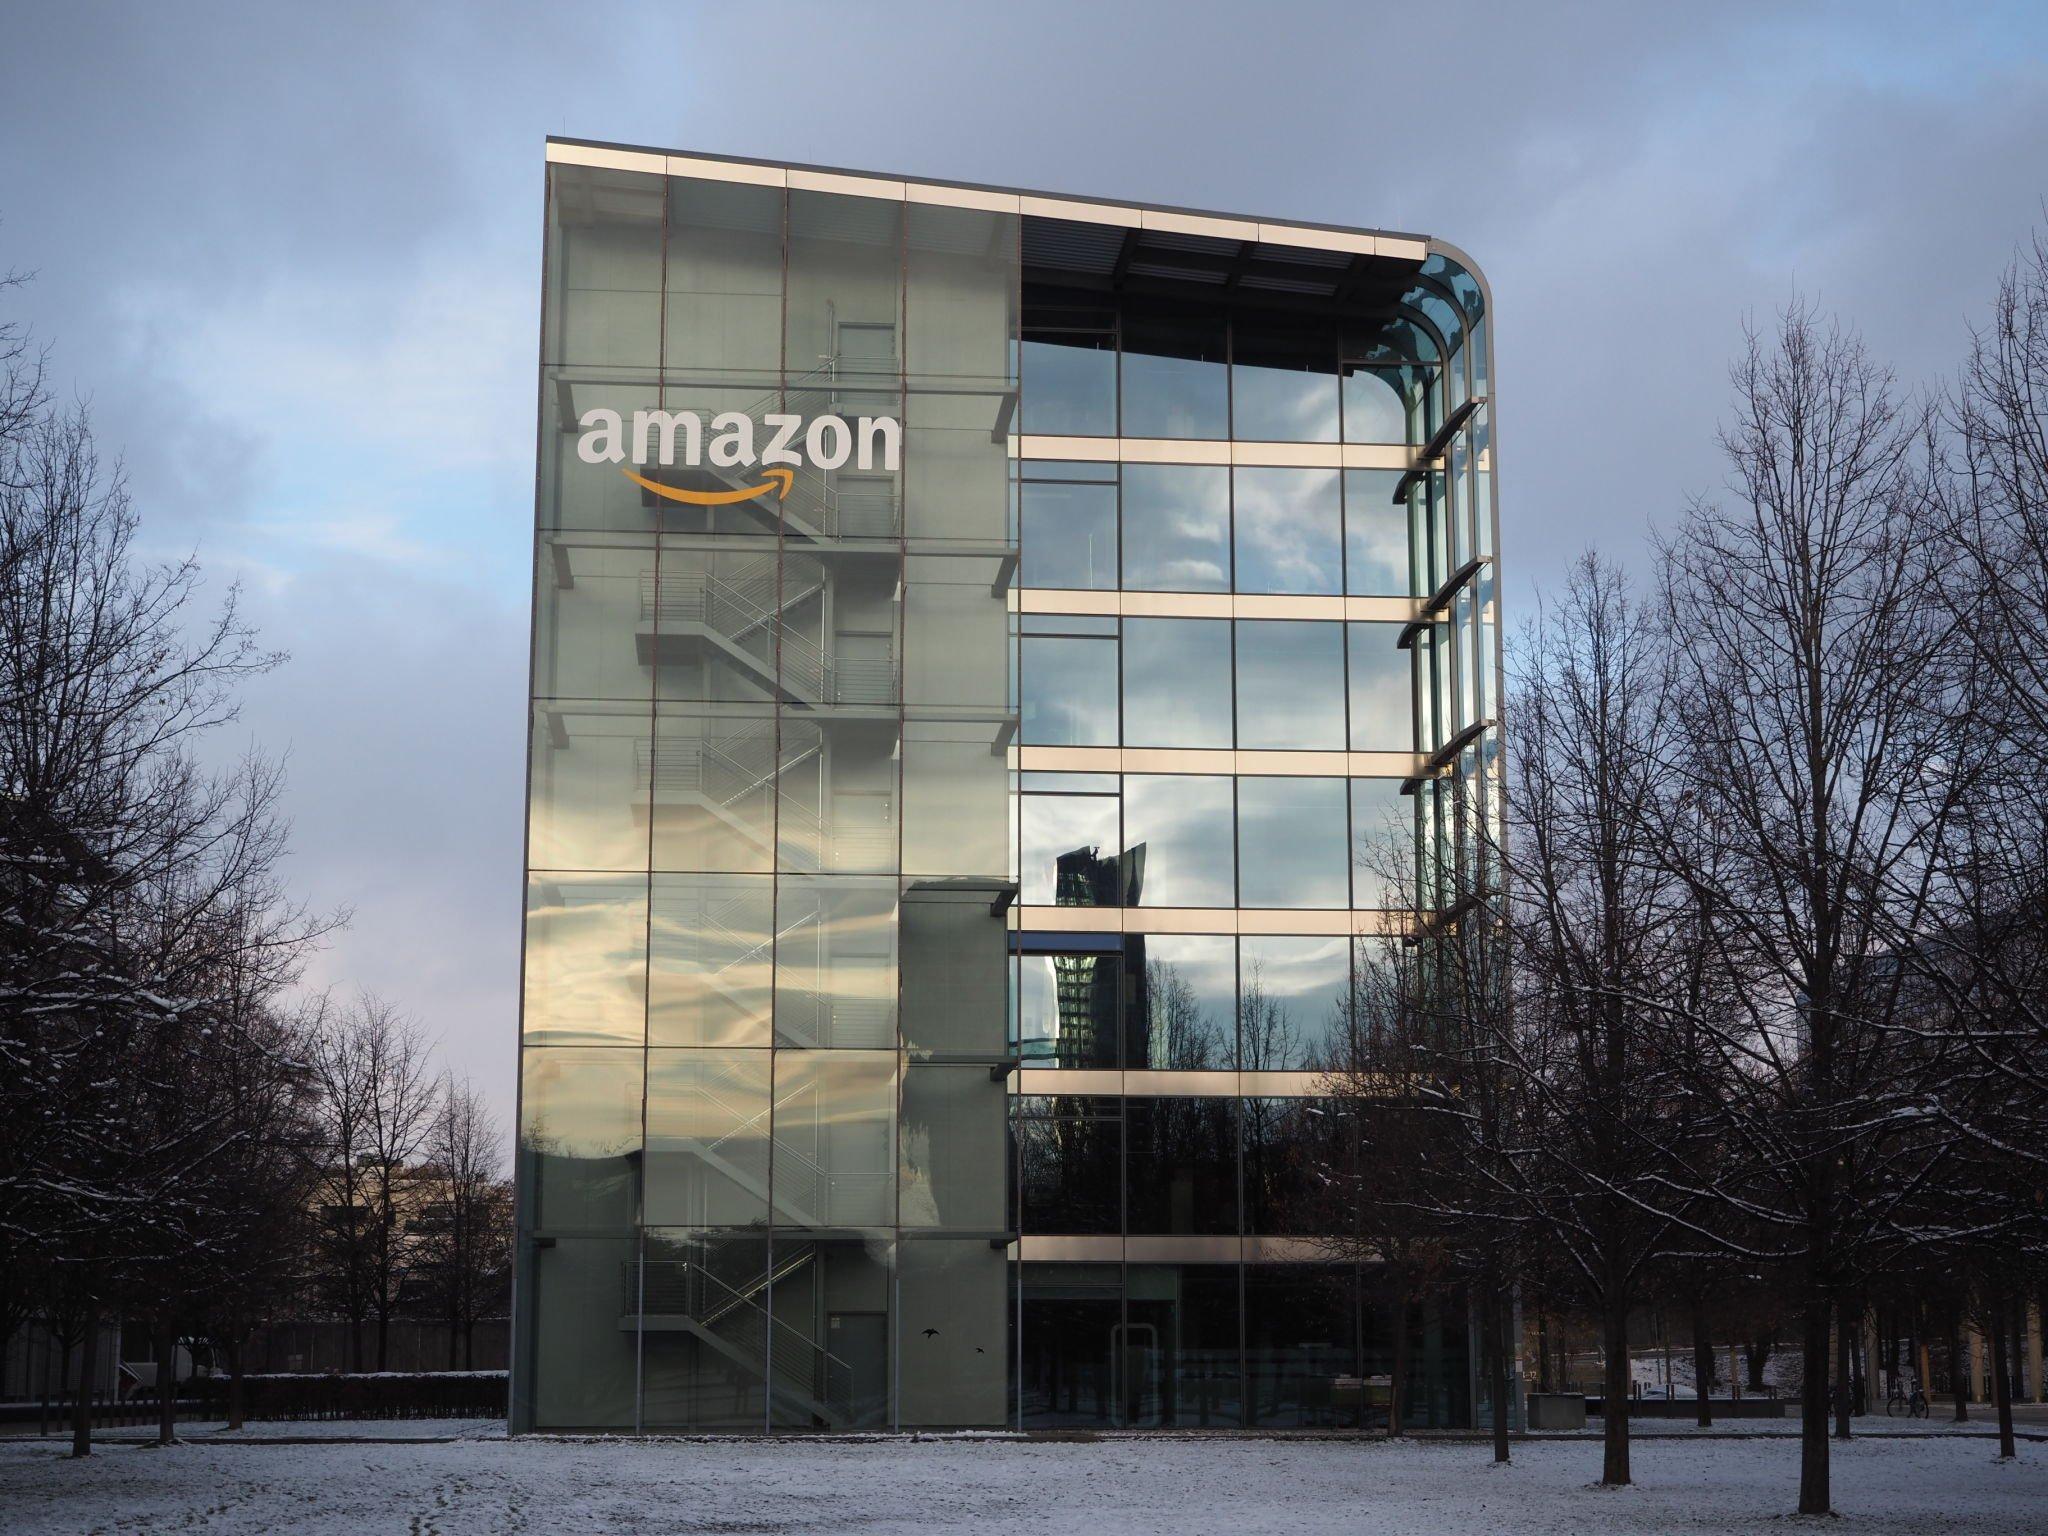 AWS Week in Review – February 27, 2023